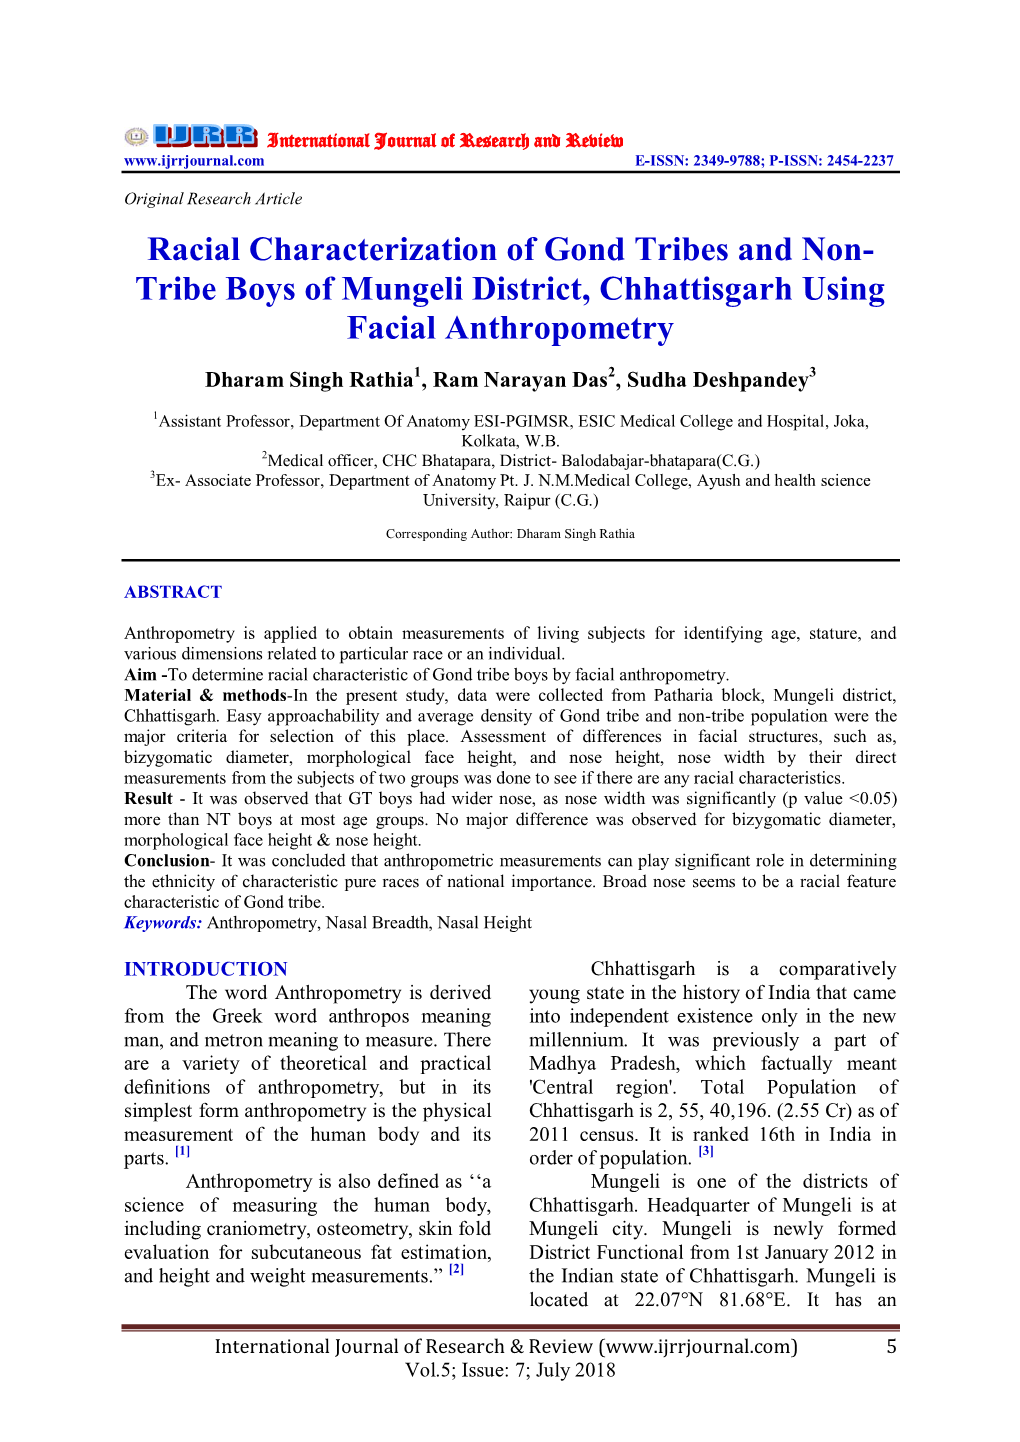 Racial Characterization of Gond Tribes and Non- Tribe Boys of Mungeli District, Chhattisgarh Using Facial Anthropometry